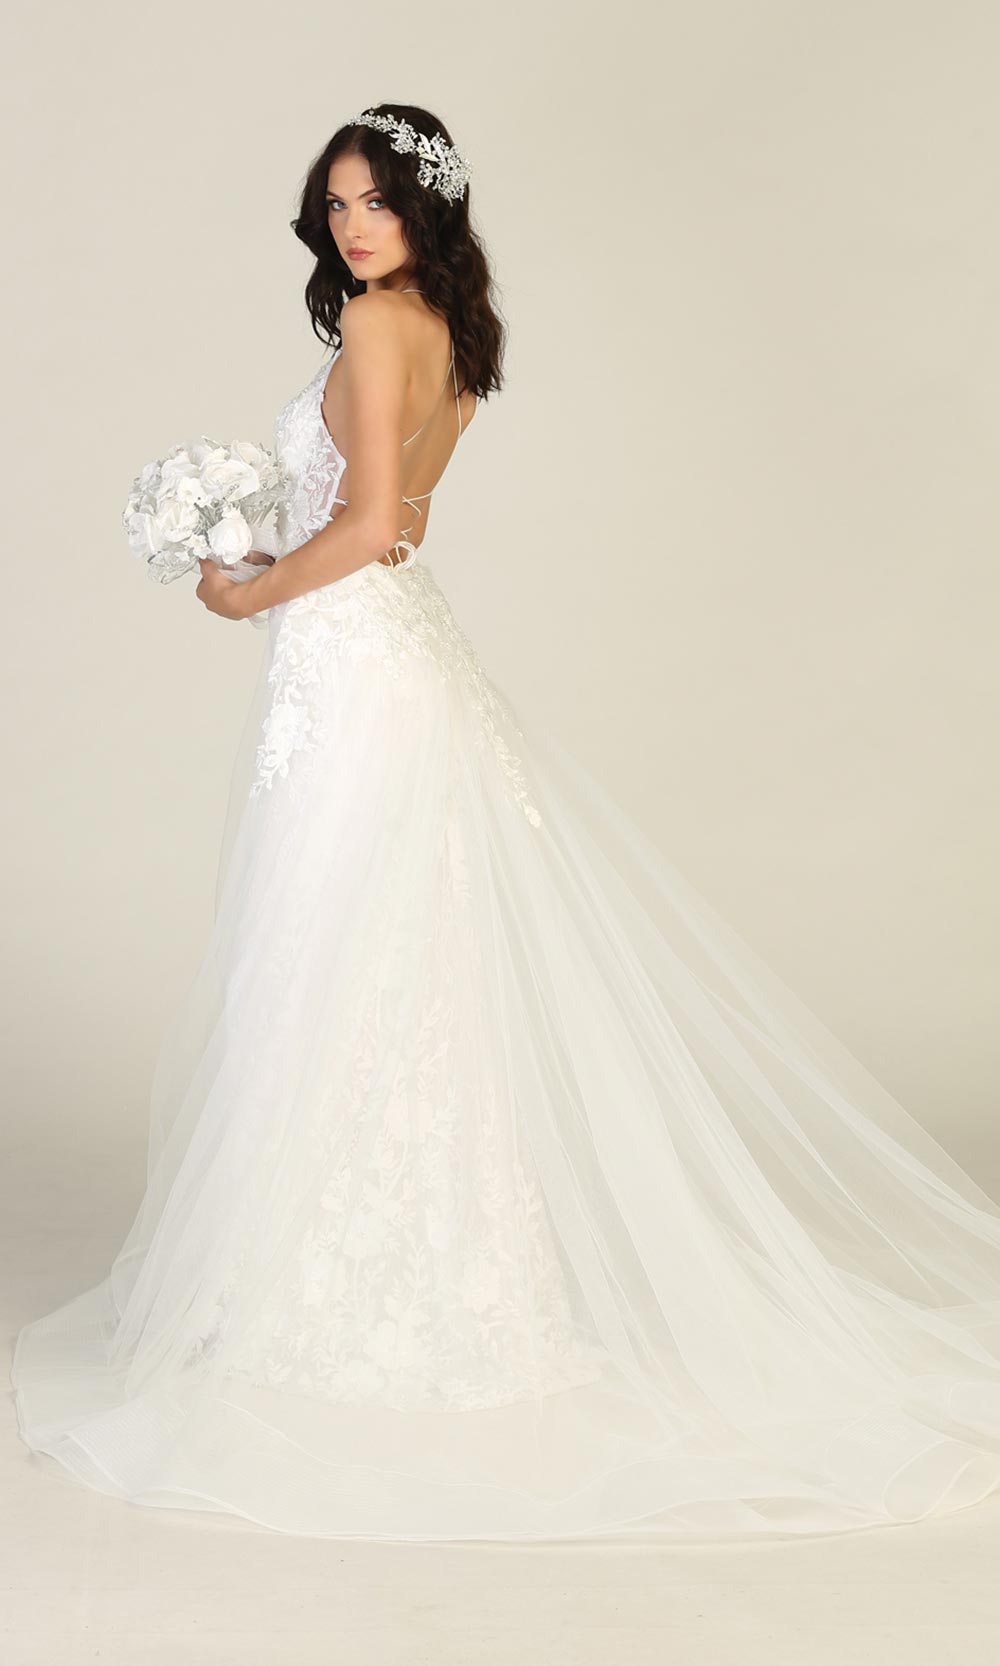 Mayqueen RQ7823-long ivory sexy wedding dress w/v neck & open back. Formal lace mermaid dress is perfect wedding bridal dress, simple prom dress, court/civil wedding, second wedding, destination wedding dress, cheap wedding dress. Plus sizes avail-sid.jpg